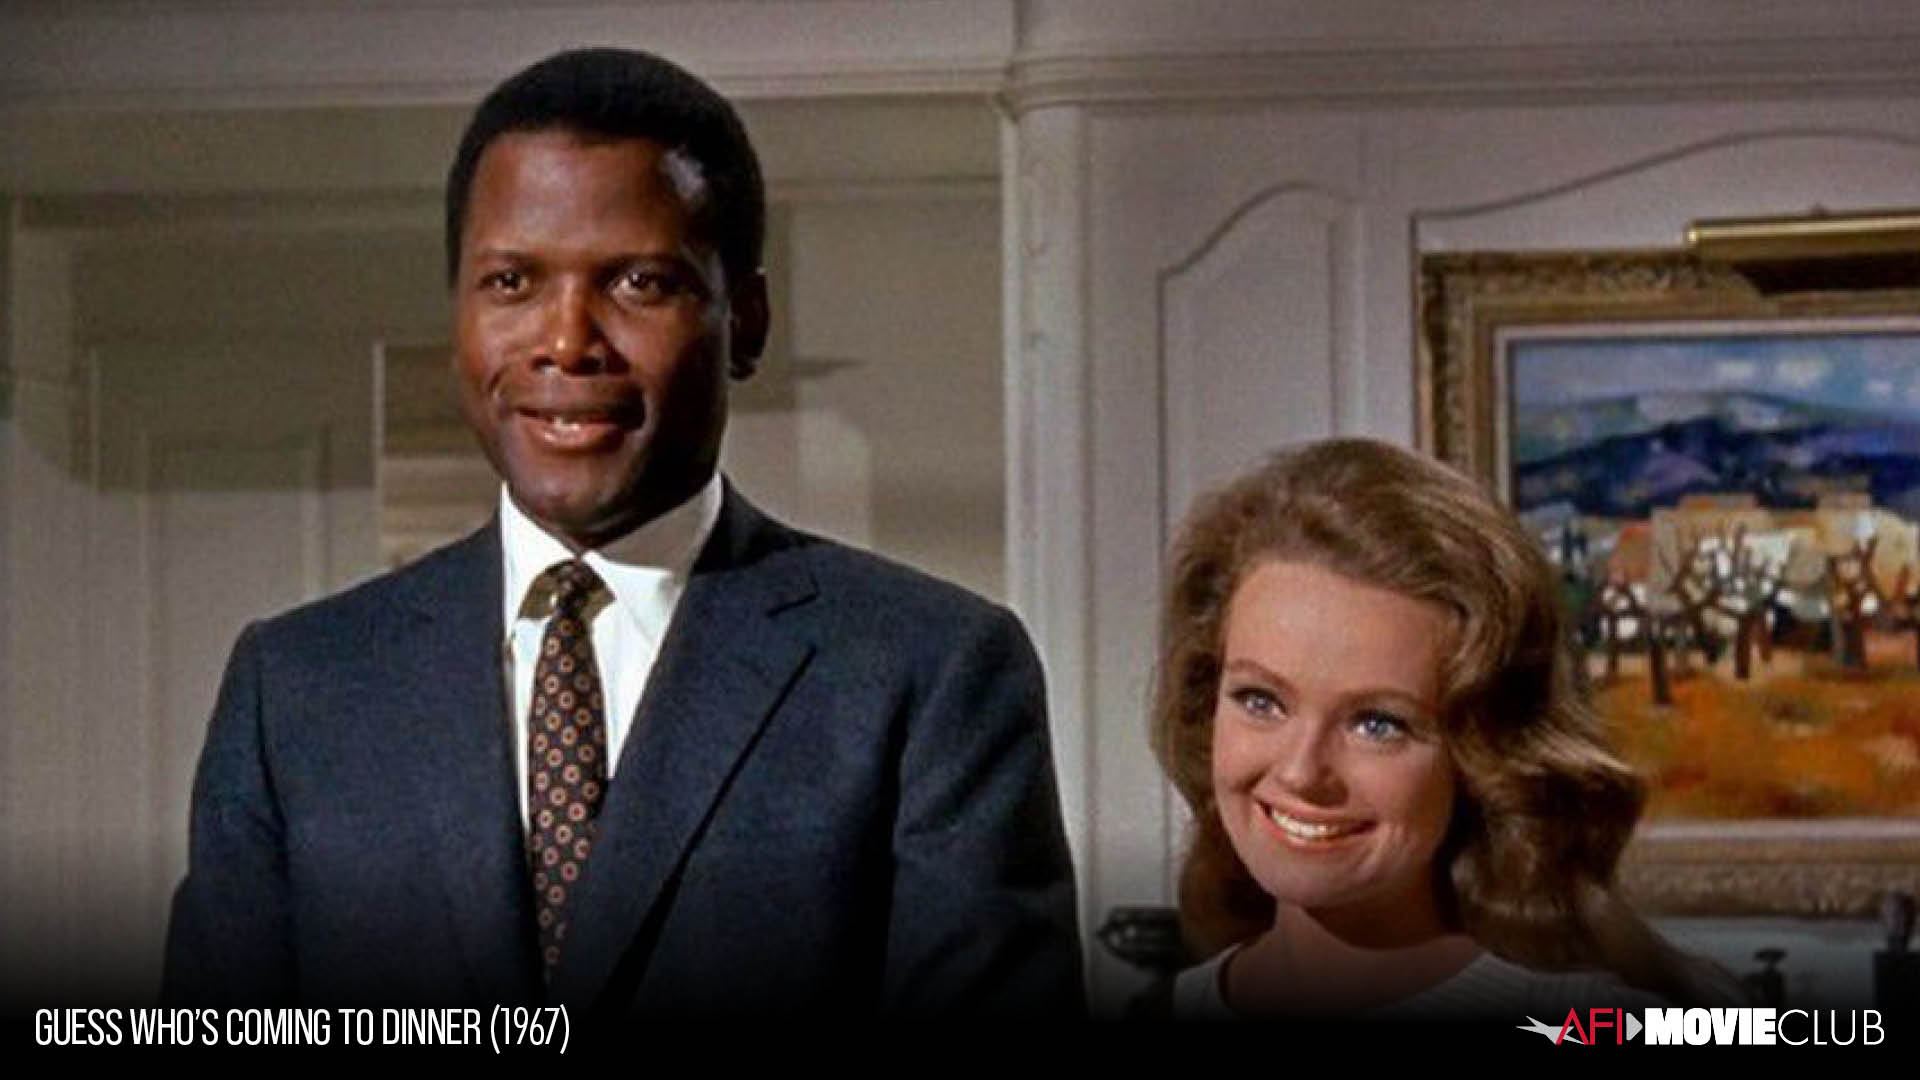 Guess Who's Coming to Dinner Film Still - Sidney Poitier and Katharine Houghton